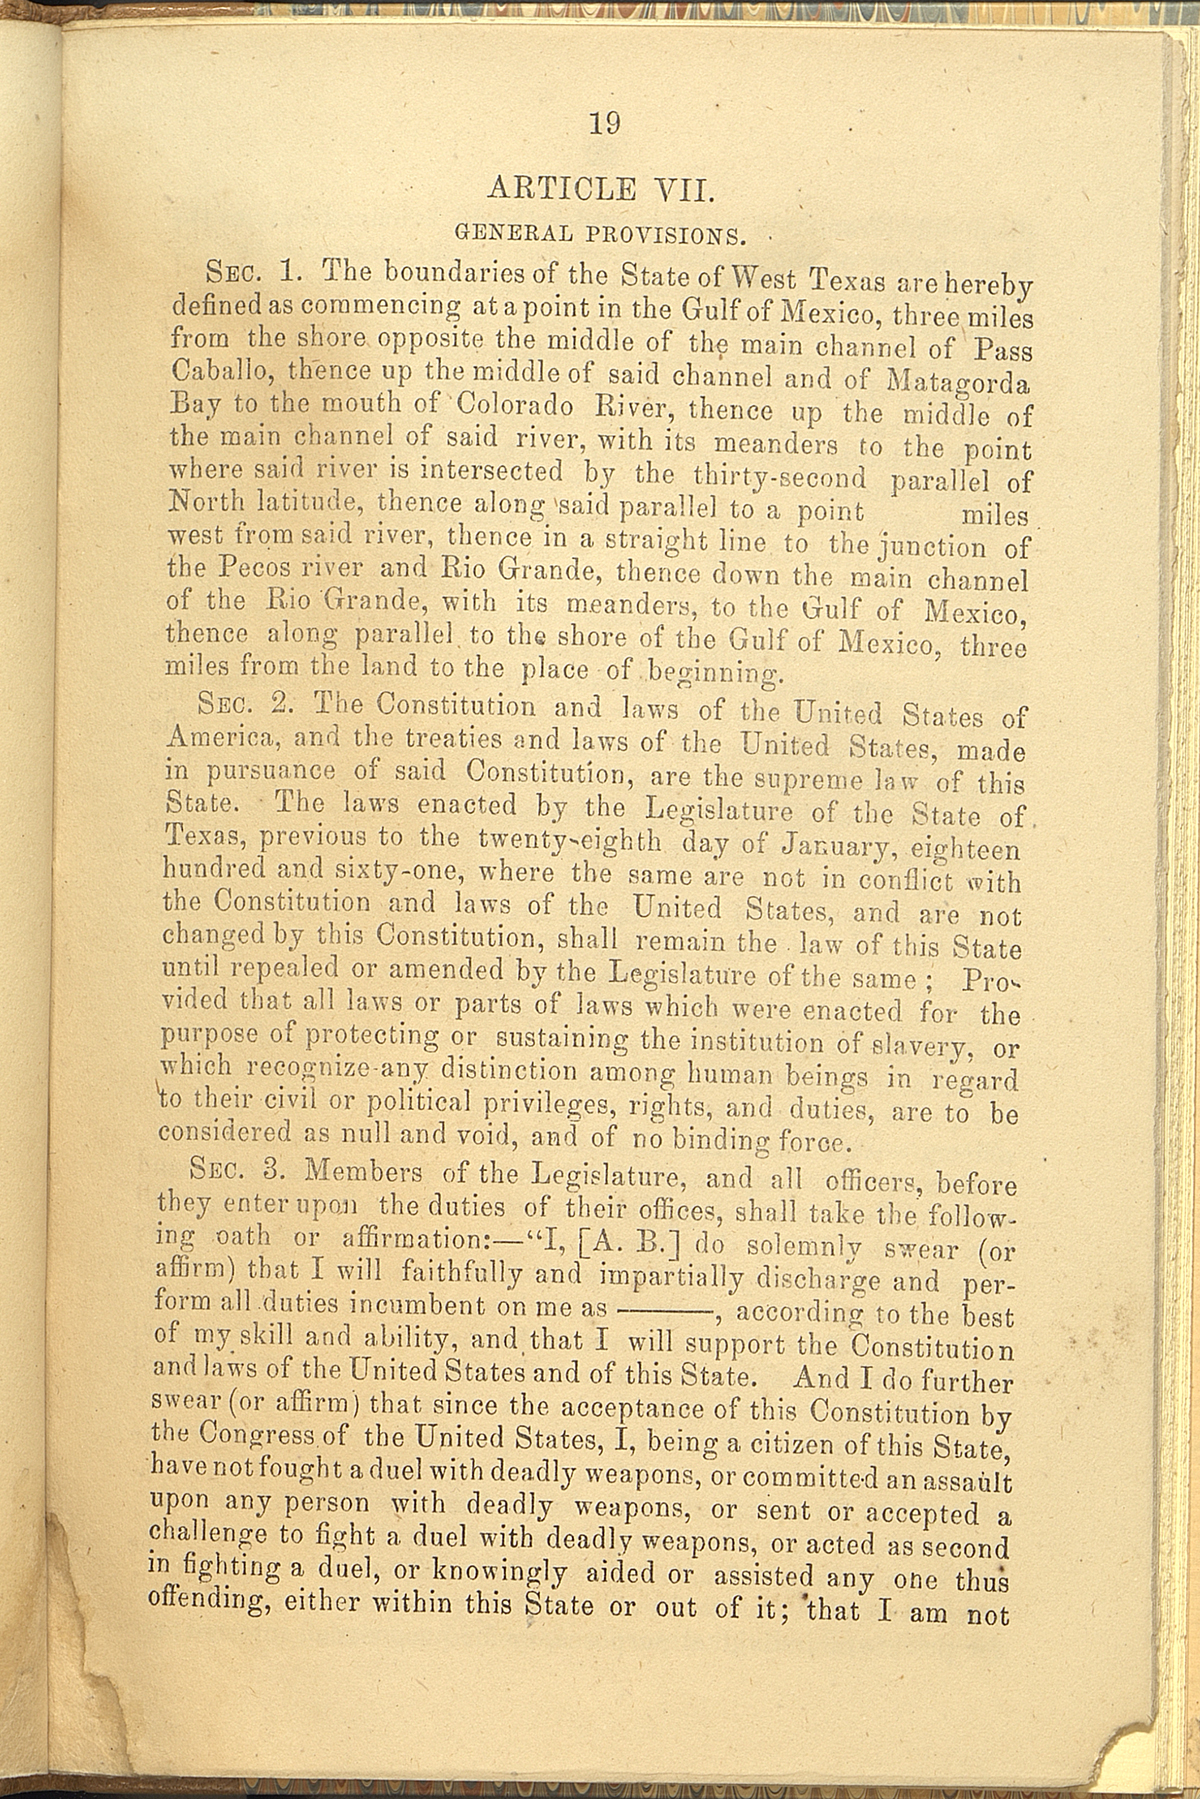 Article VII, Sections 1-3